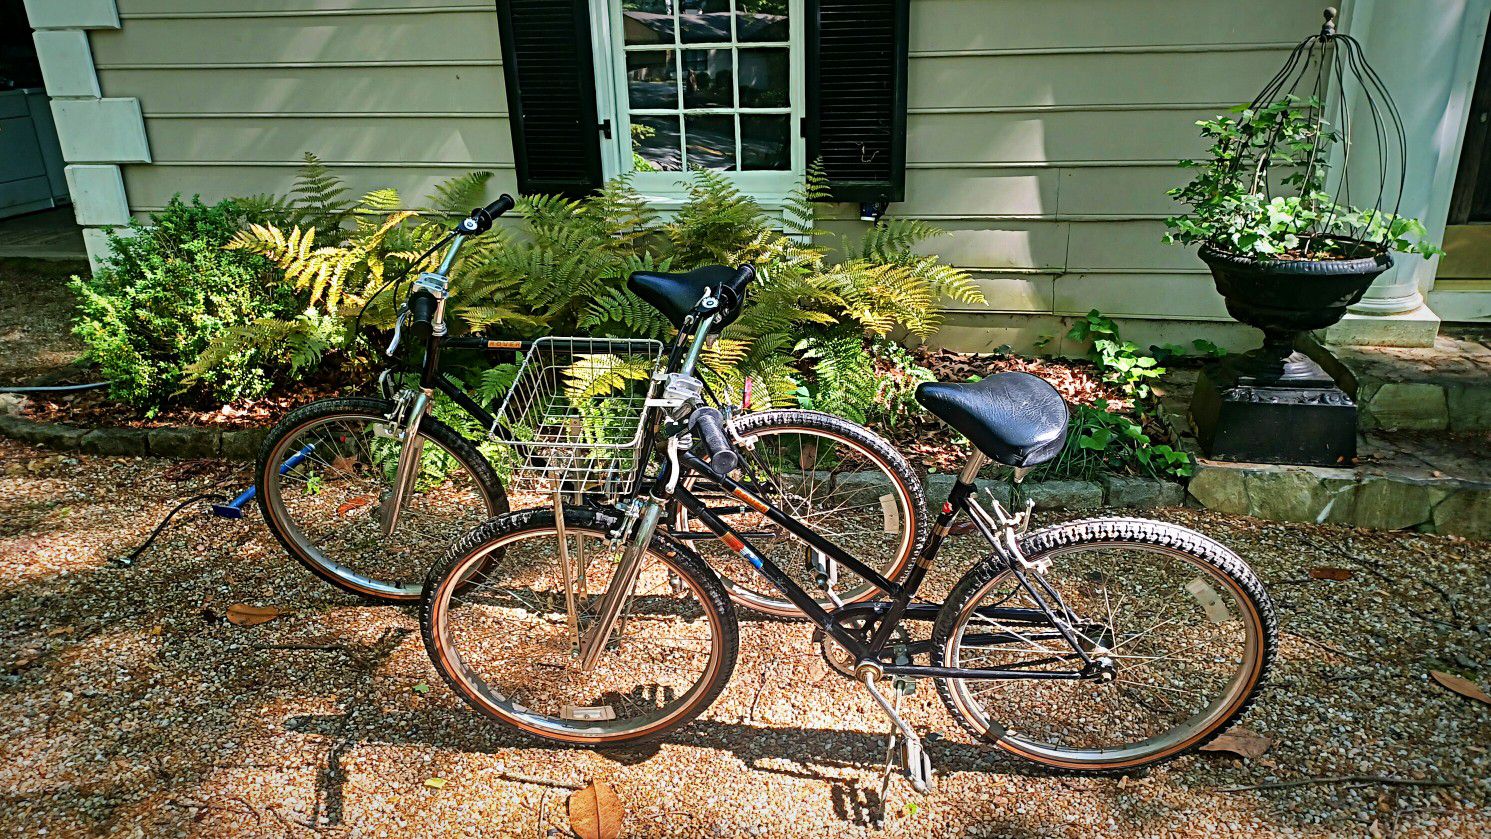 His and Hers Bikes